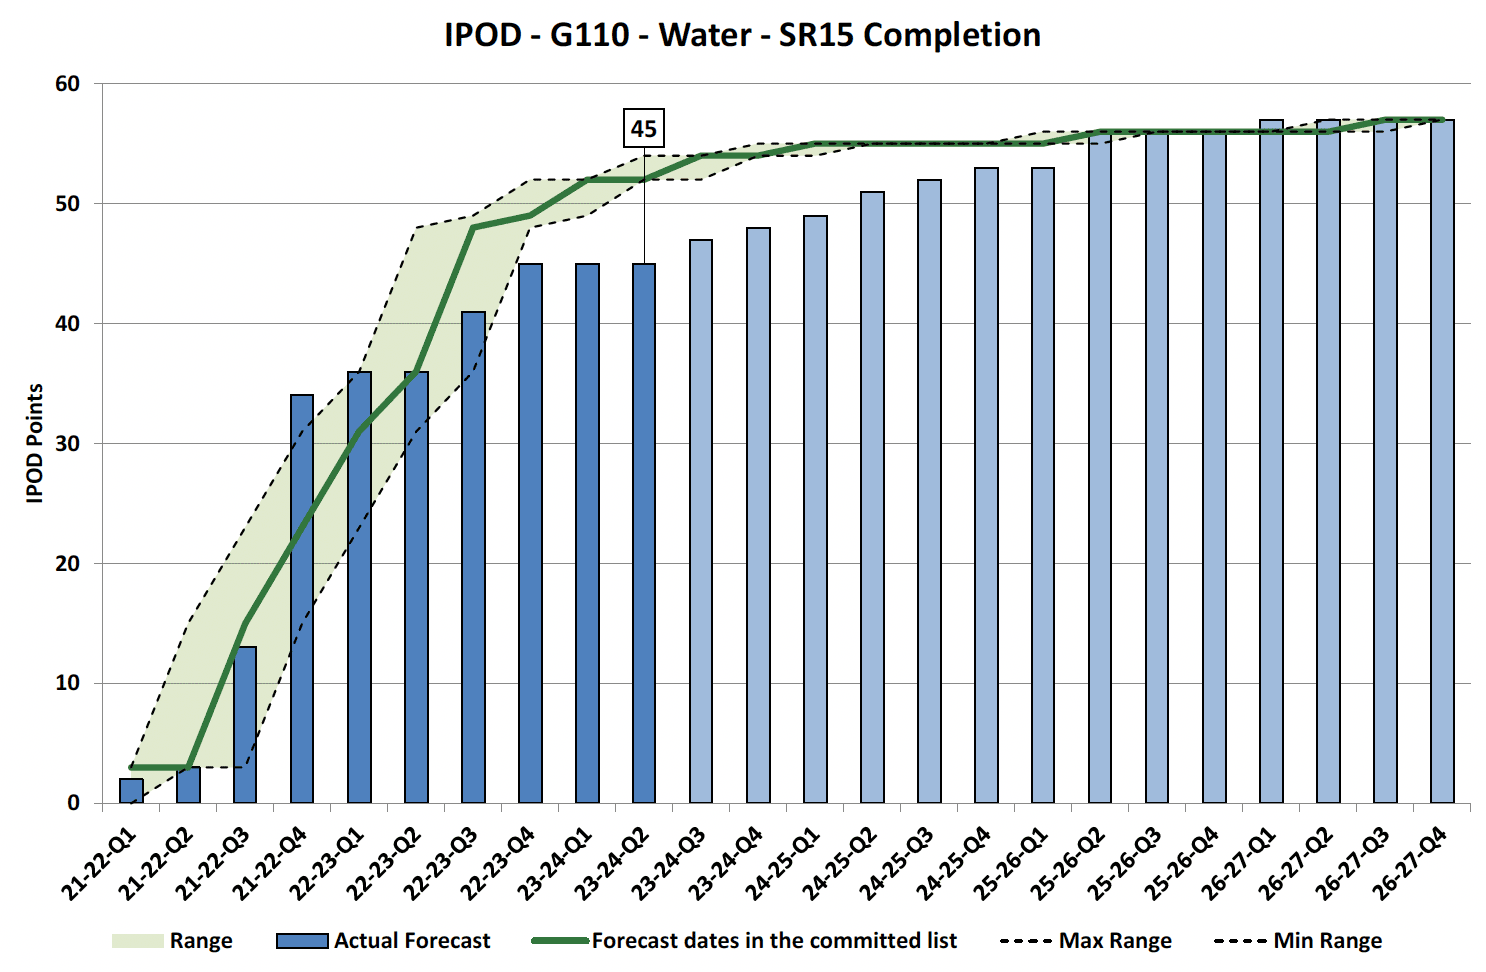 Chart showing IPOD points achieved or forecast for Financial Completion milestone against target range for SR15 Completion Projects in Water Portfolio